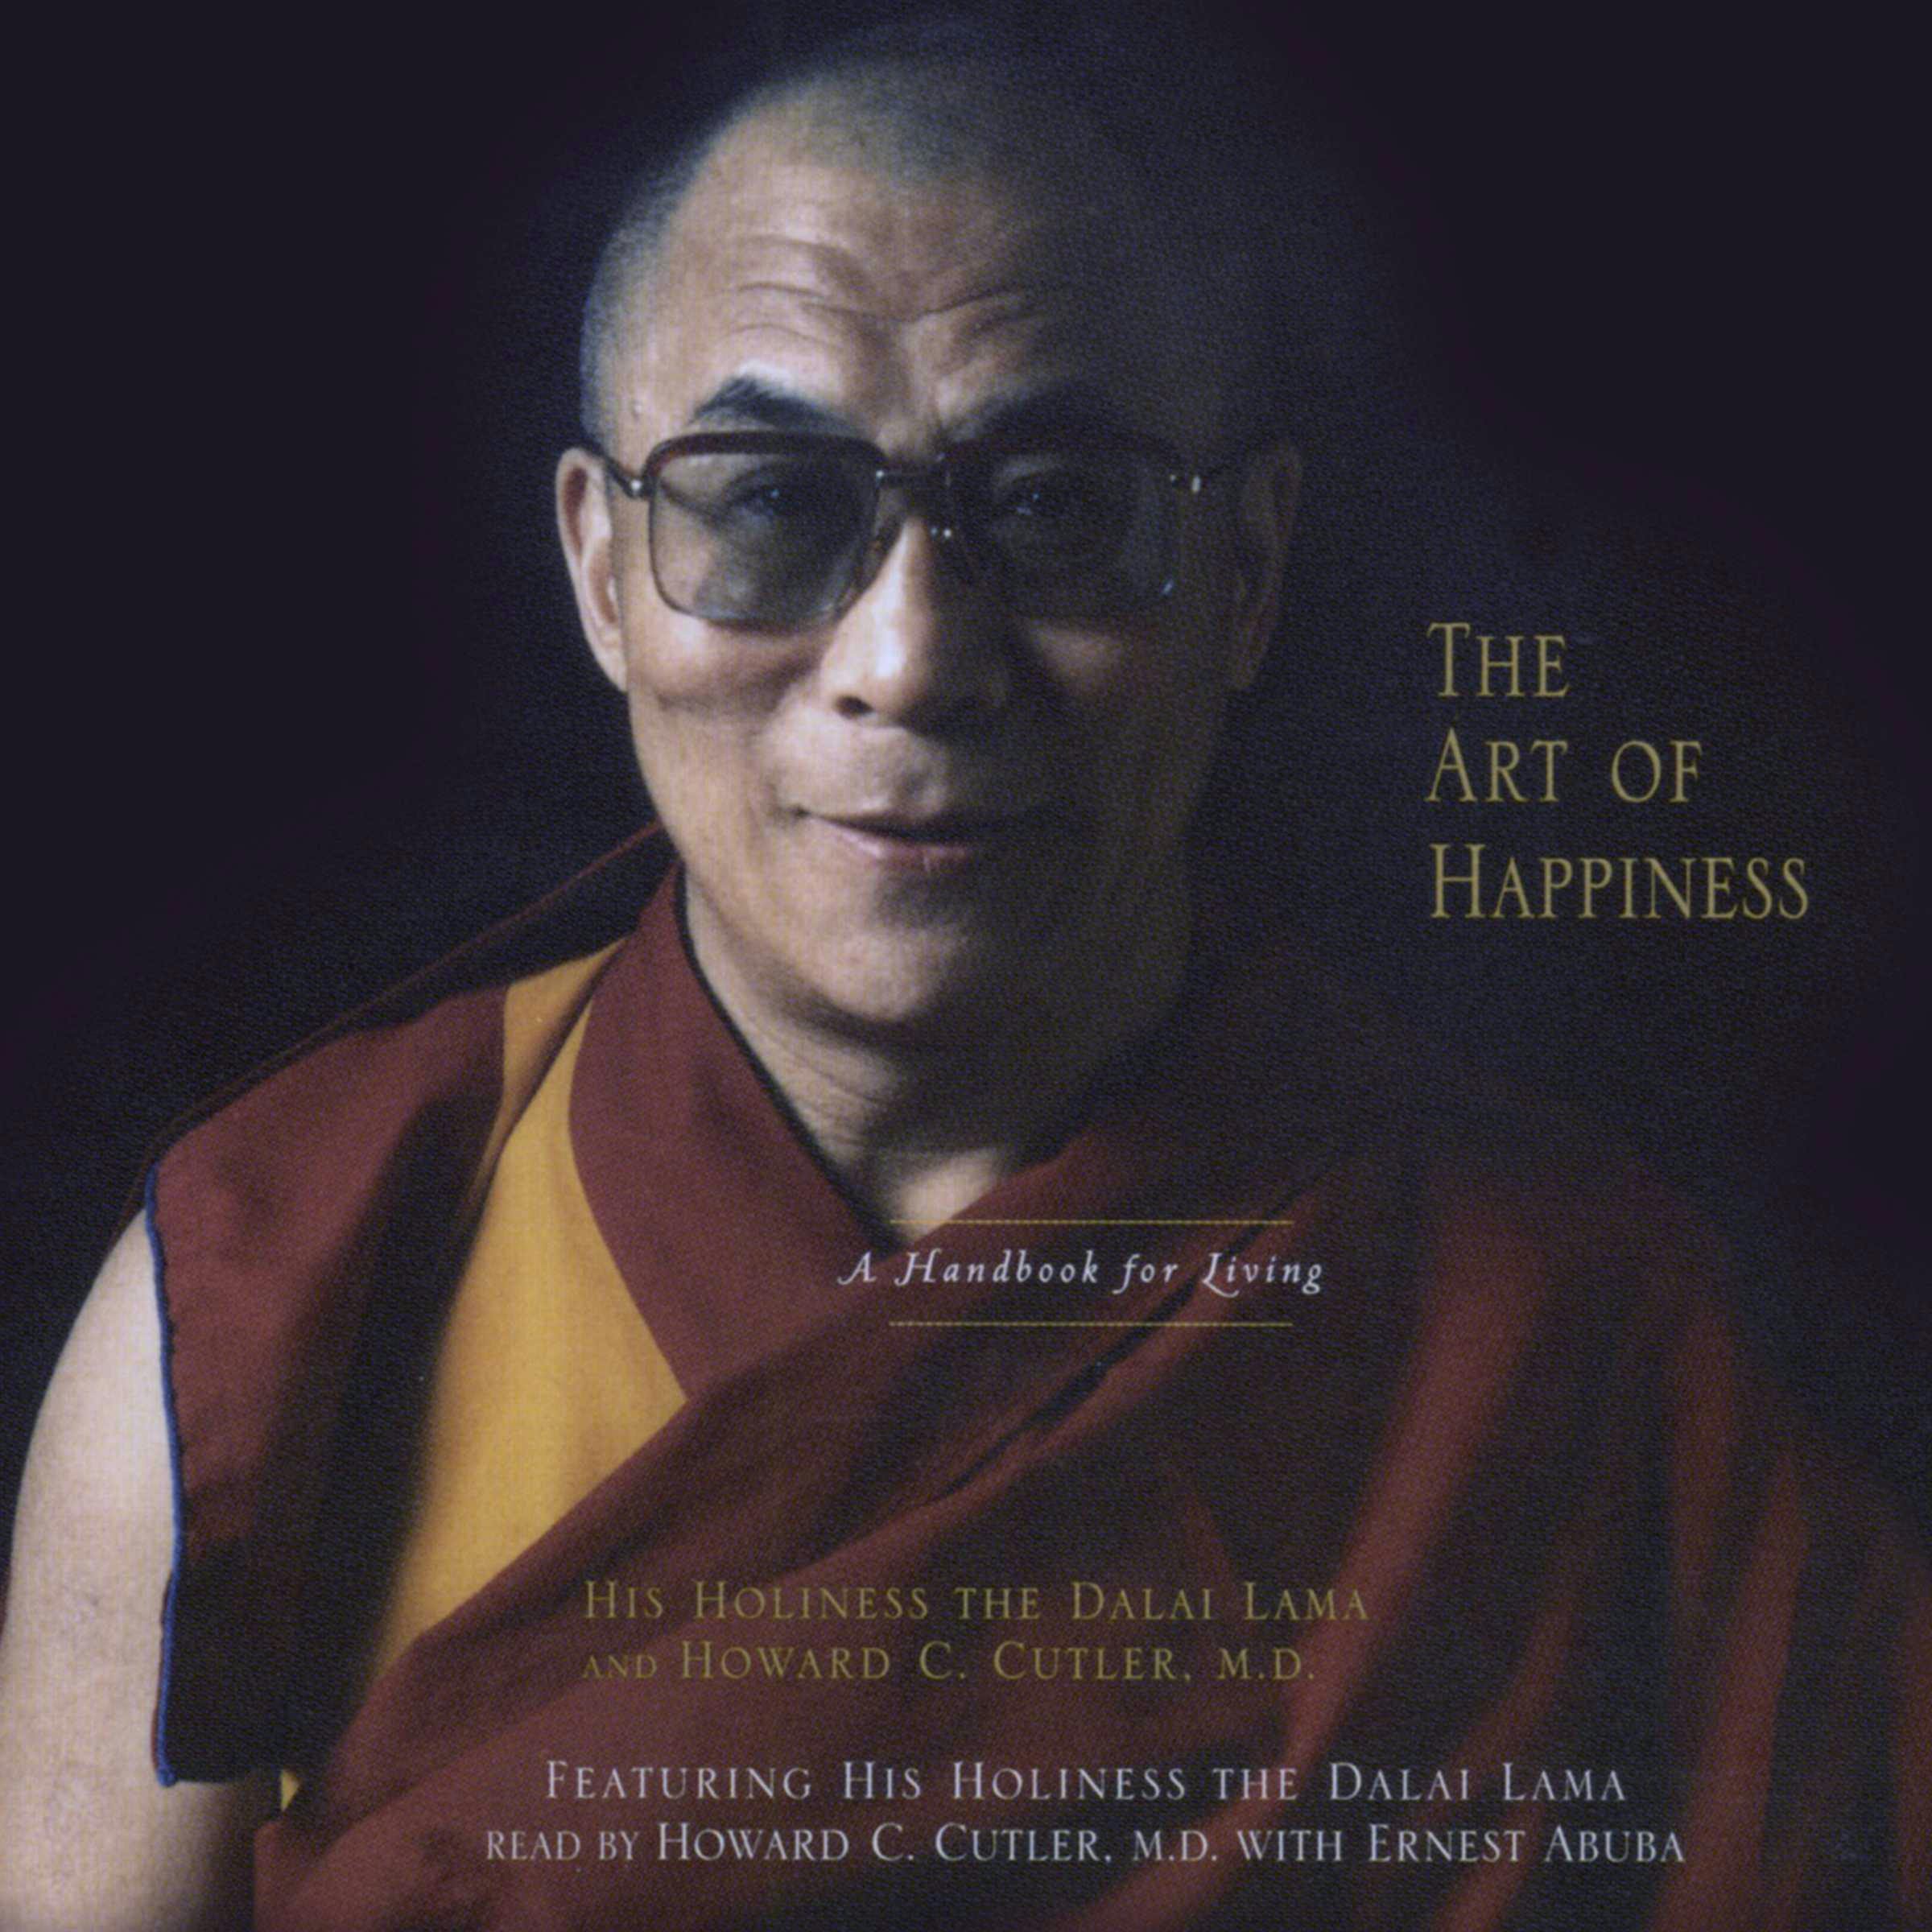 The Art of Happiness: A Handbook for Living - undefined